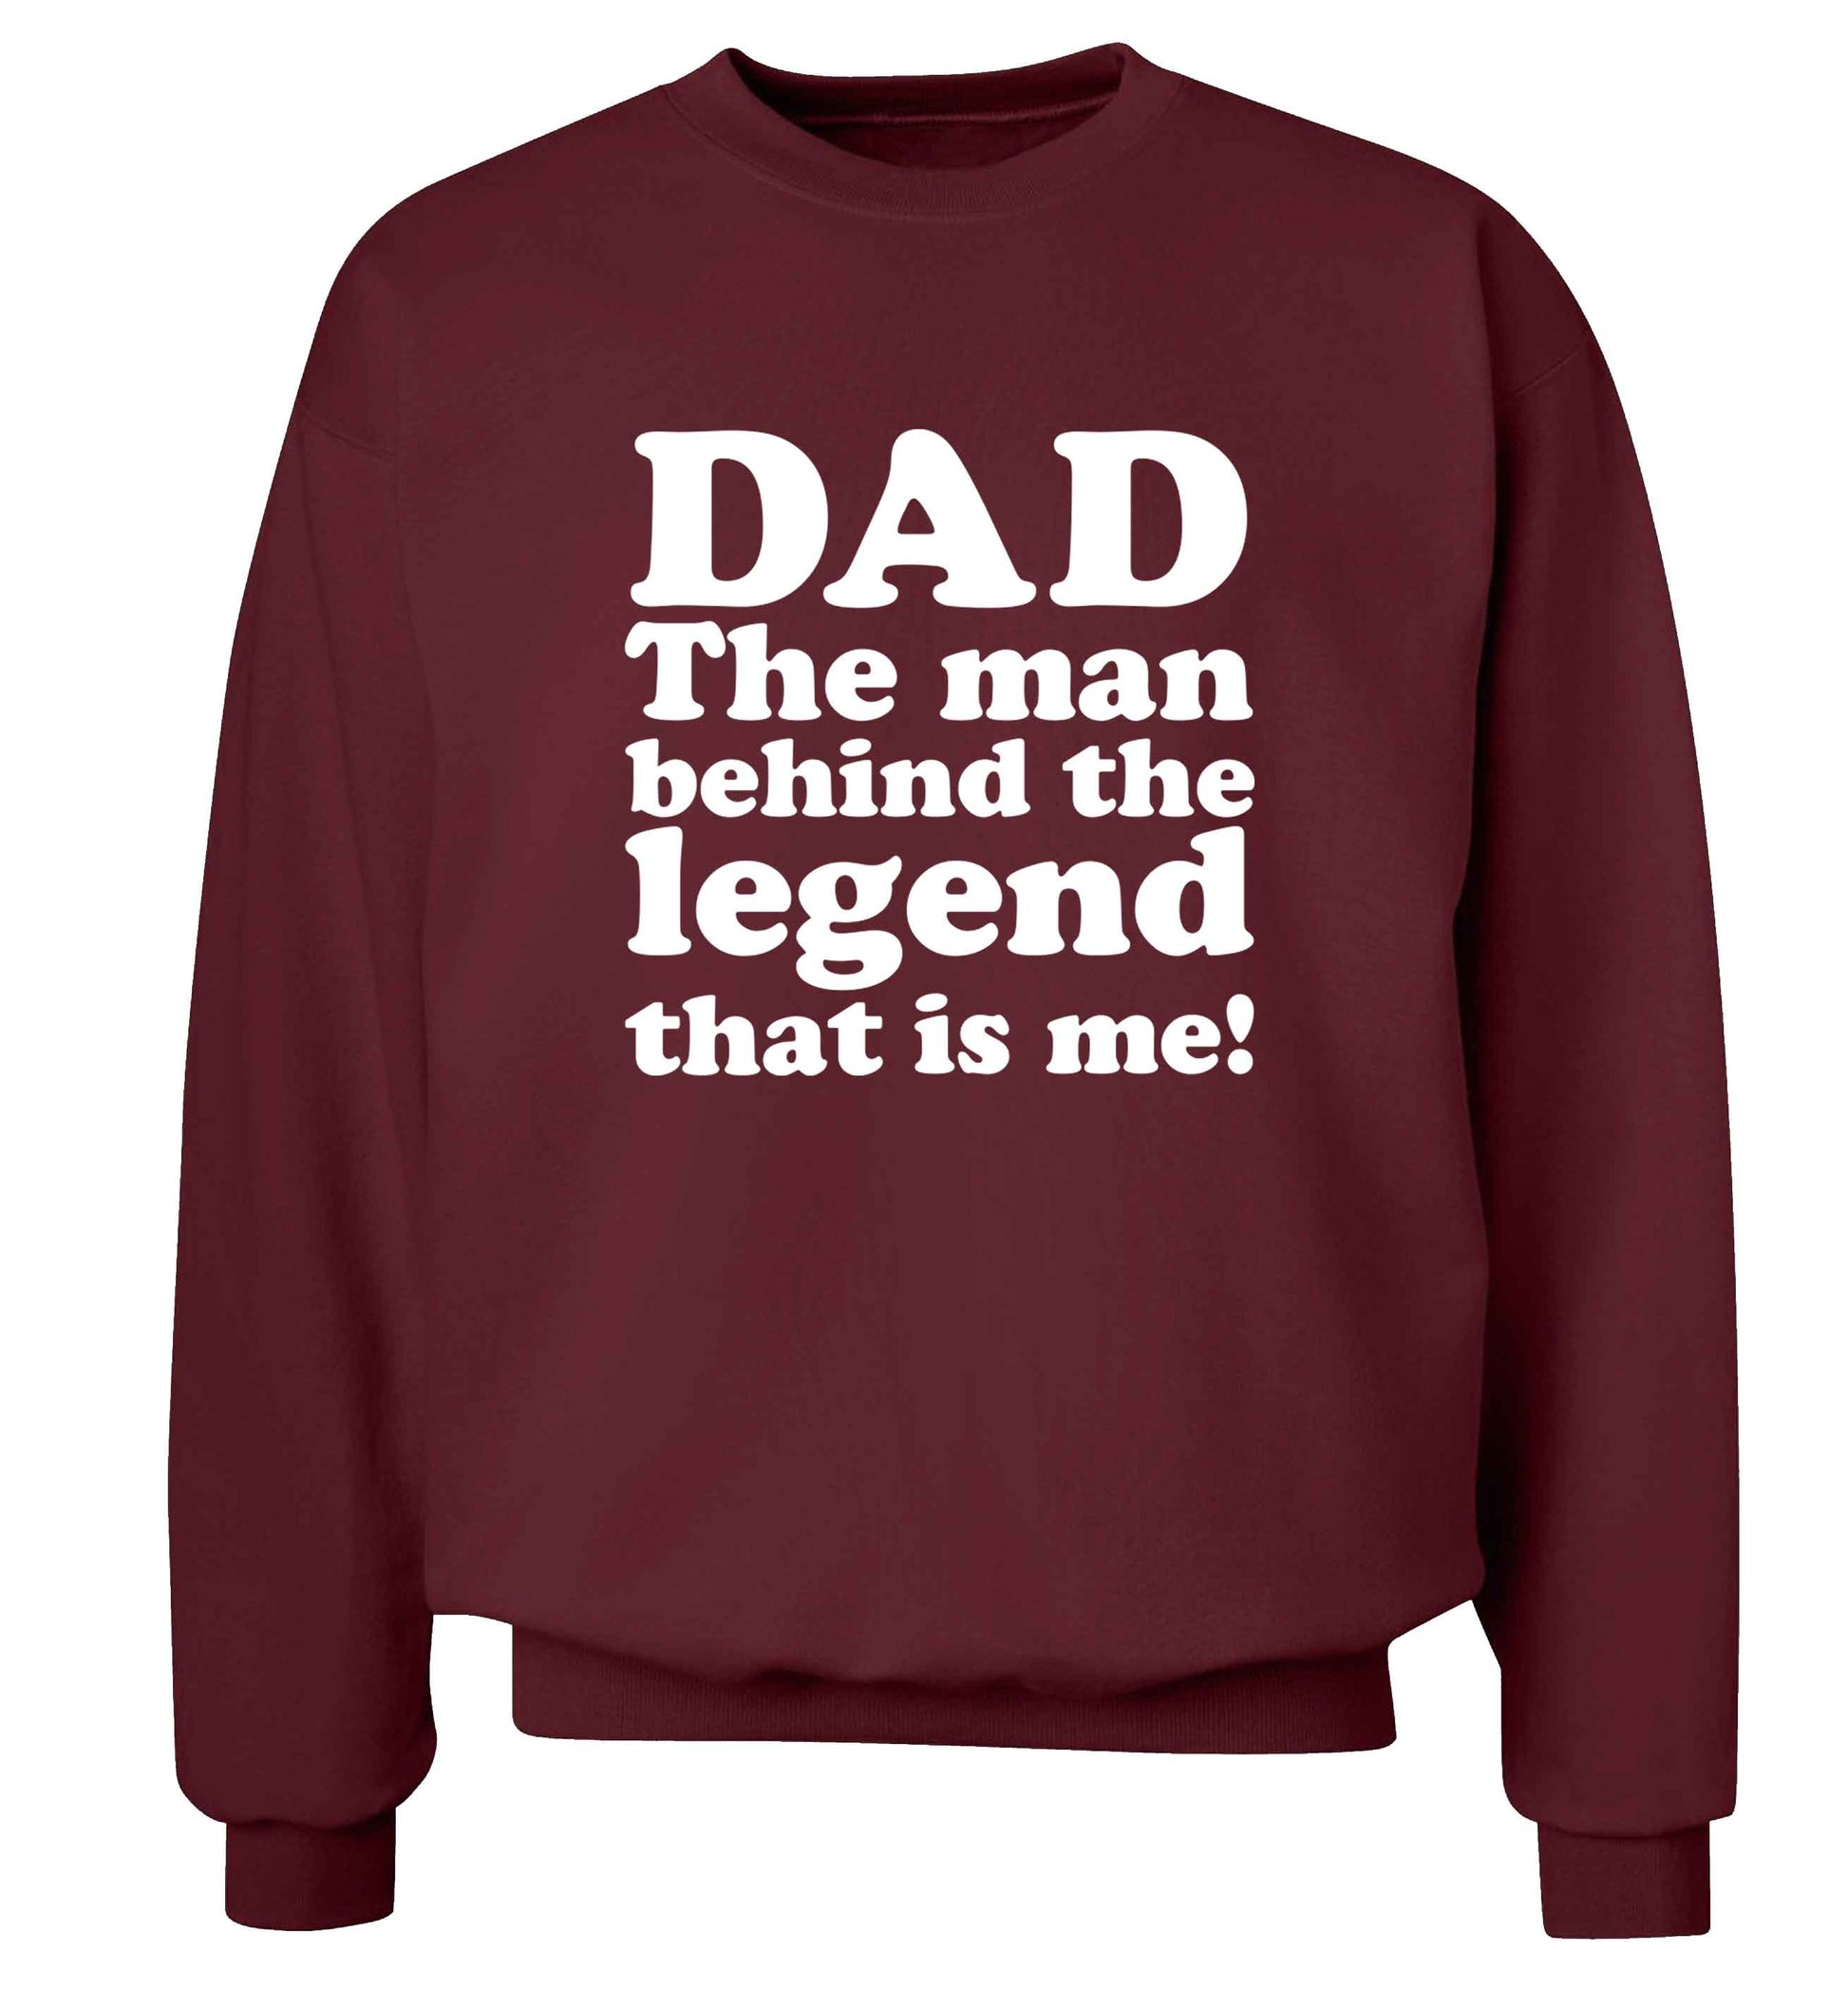 Dad the man behind the legend that is me adult's unisex maroon sweater 2XL